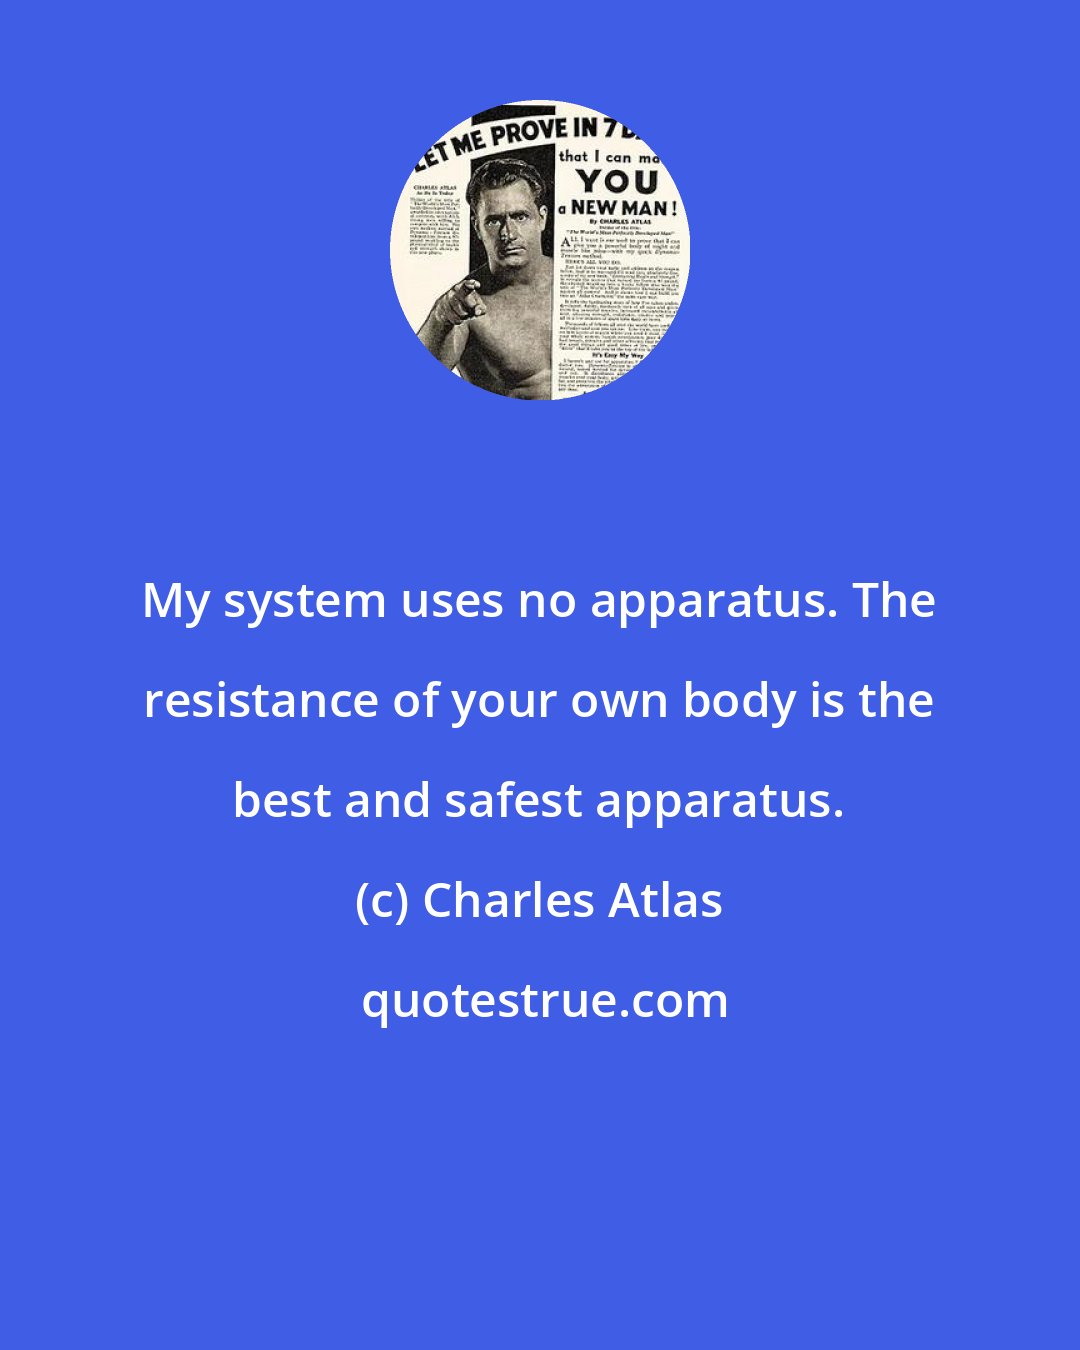 Charles Atlas: My system uses no apparatus. The resistance of your own body is the best and safest apparatus.